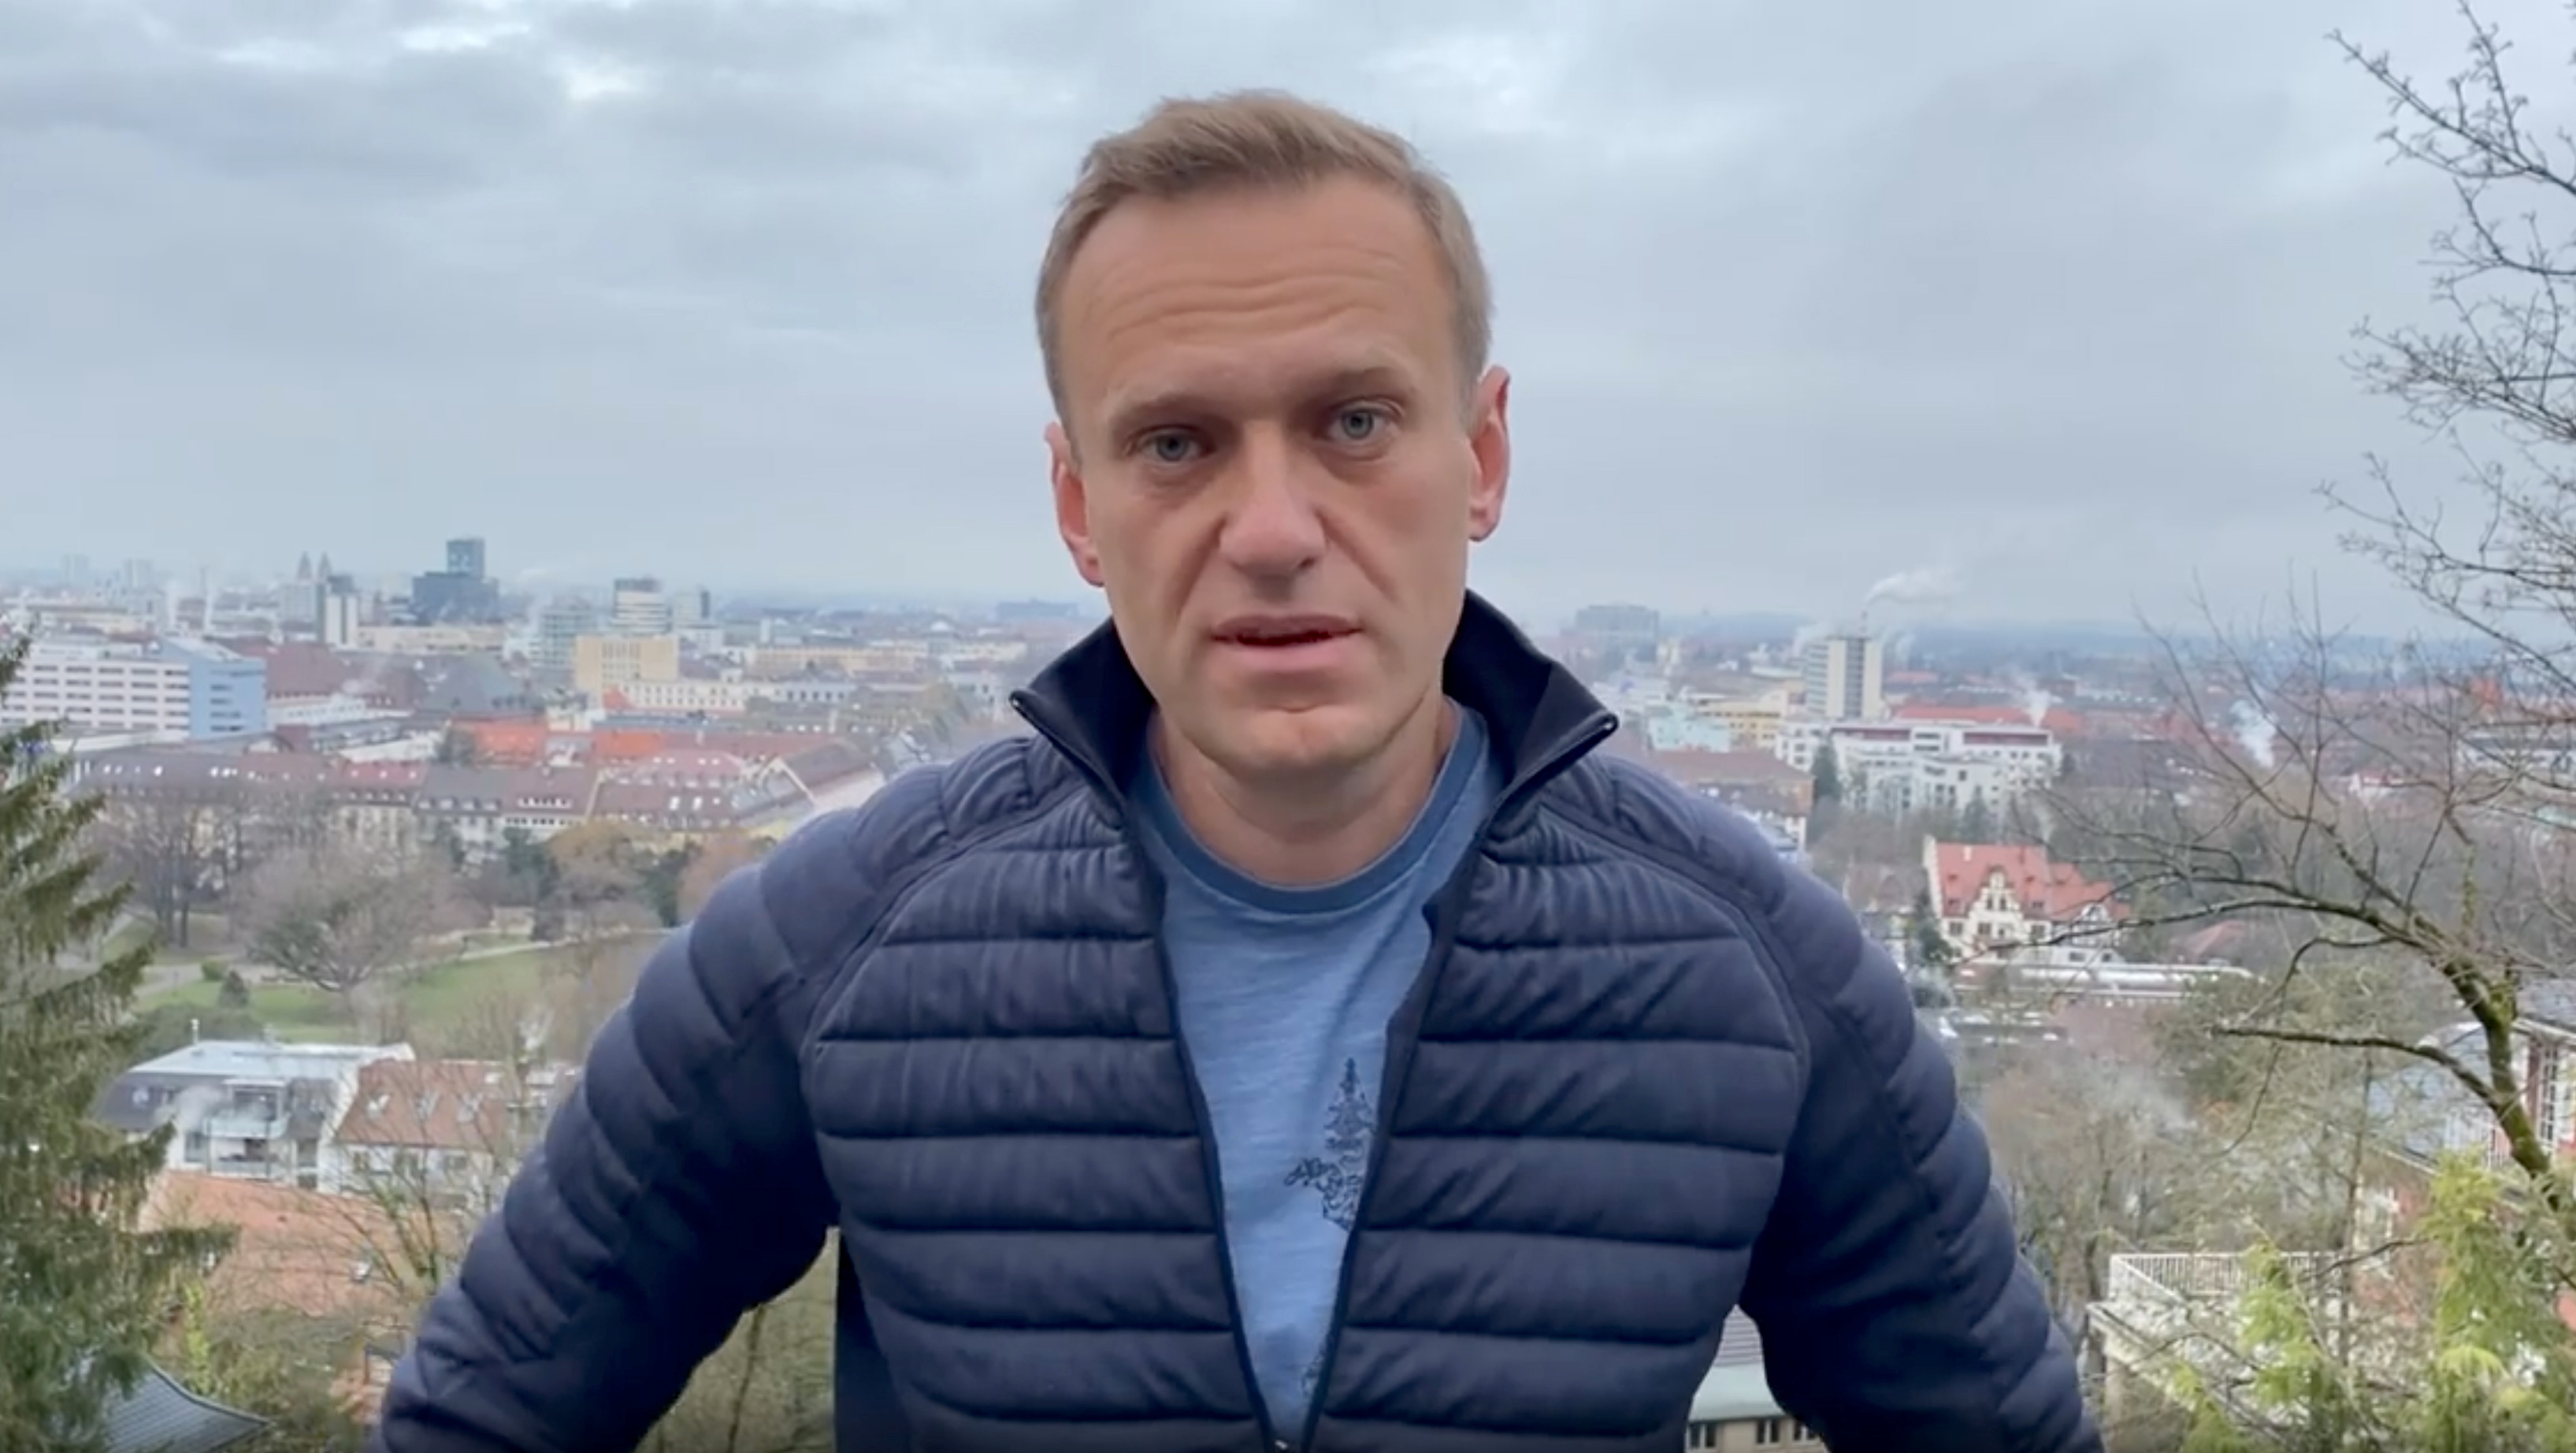 Russian opposition politician Alexei Navalny says he will return to Russia on Sunday